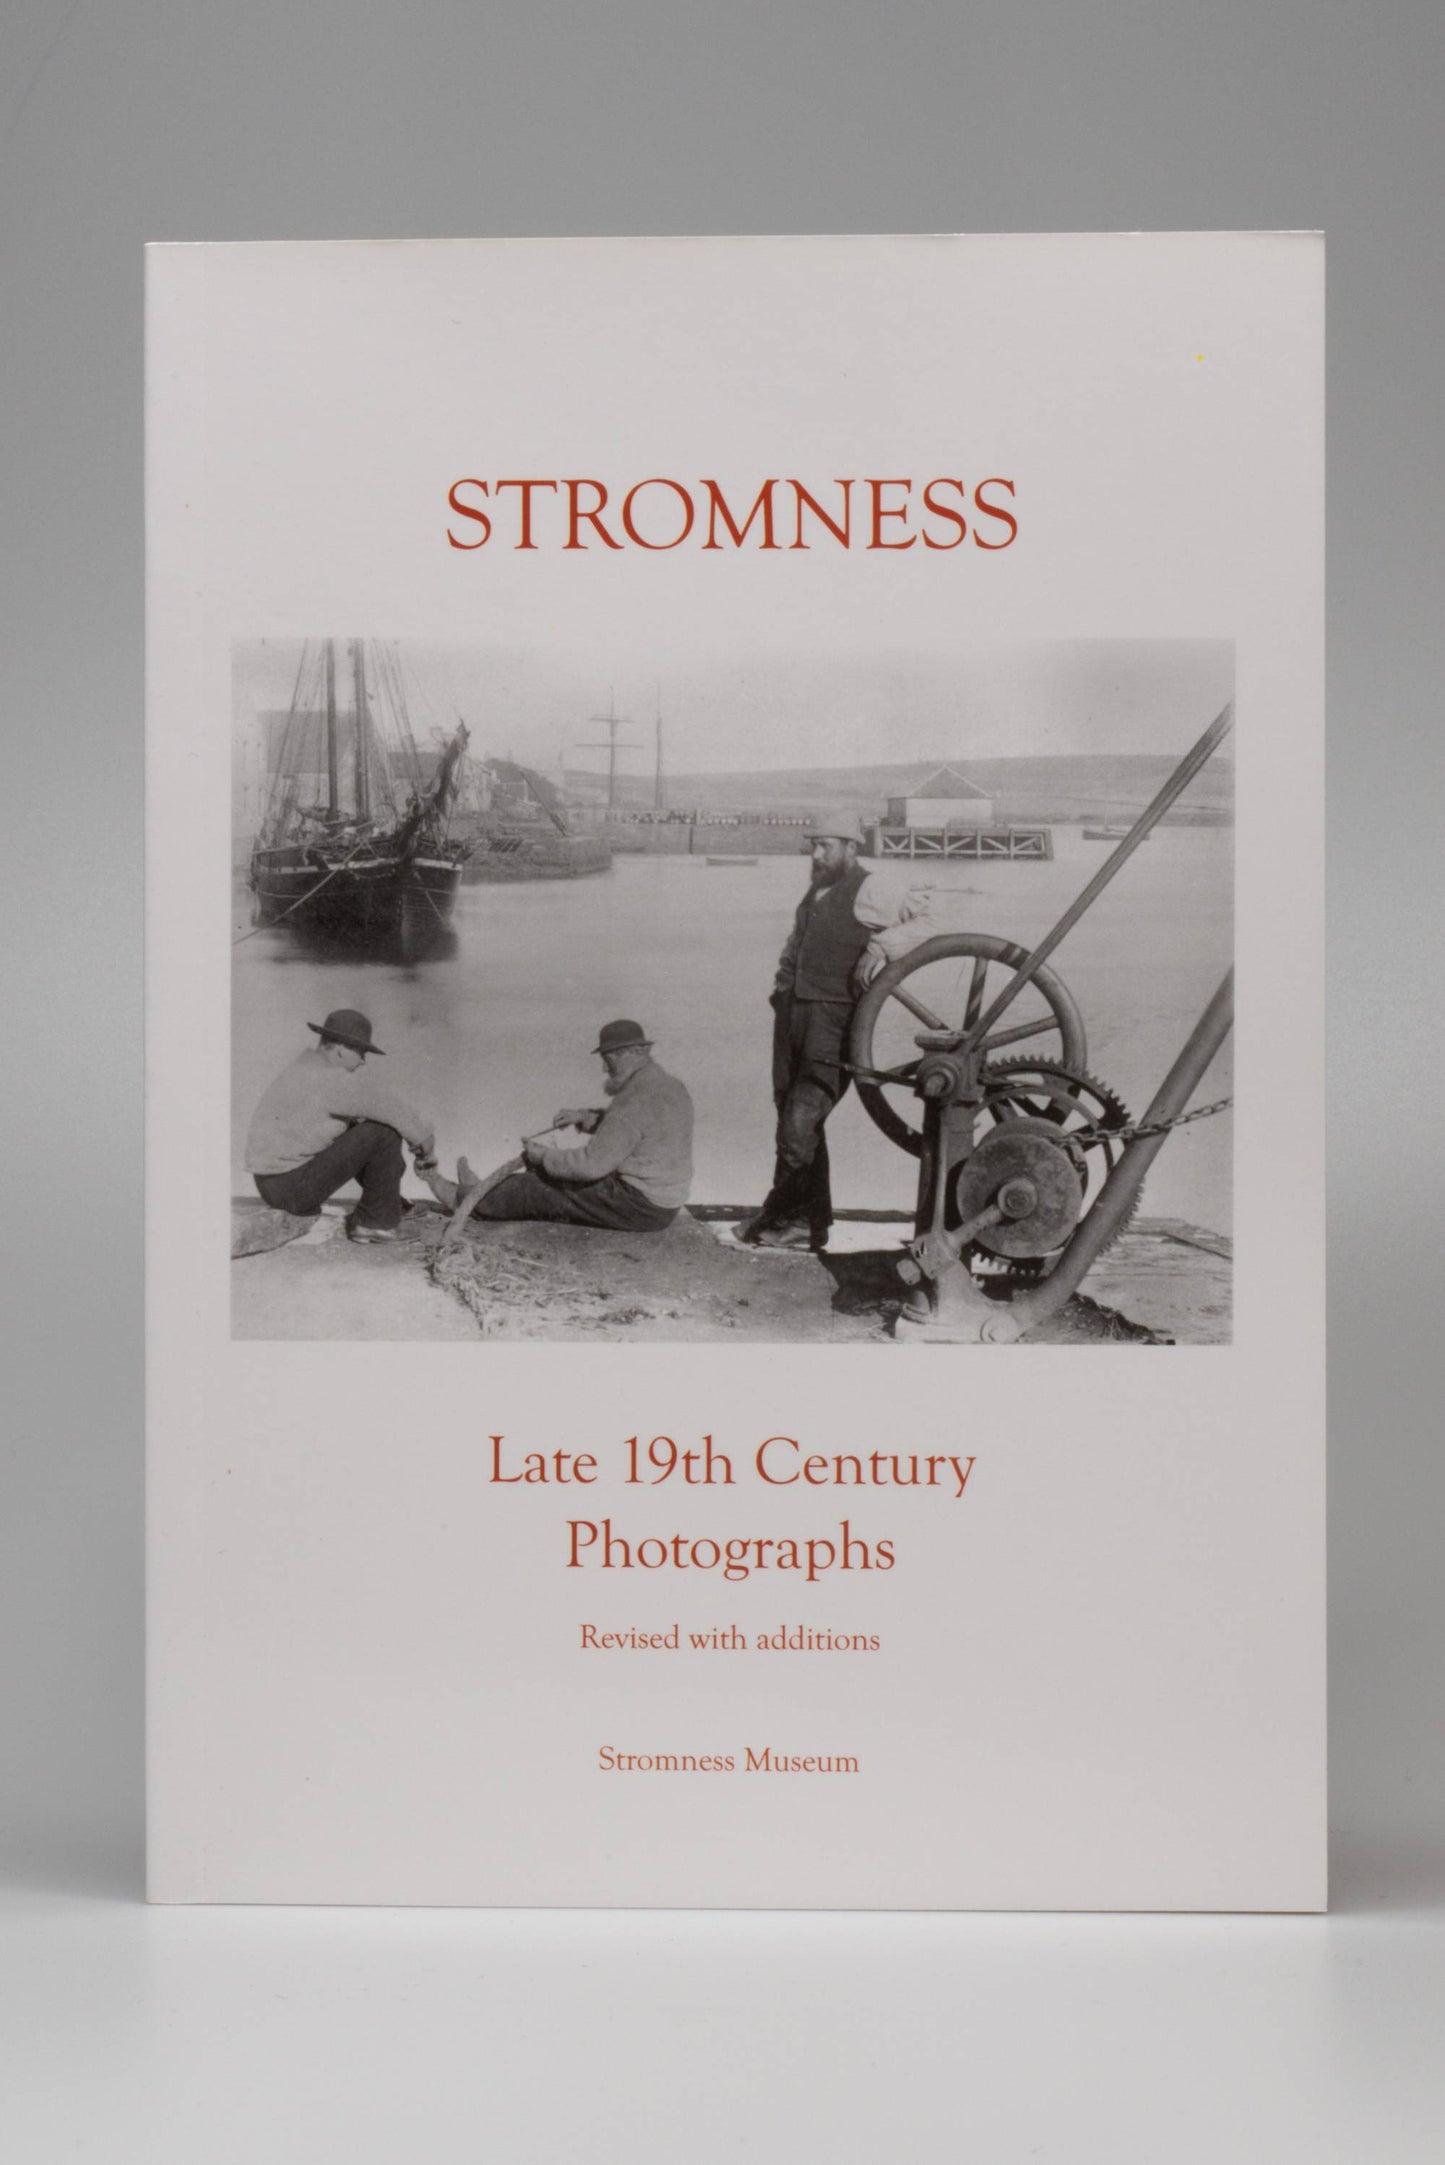 Stromness - Late 19th Century Photographs